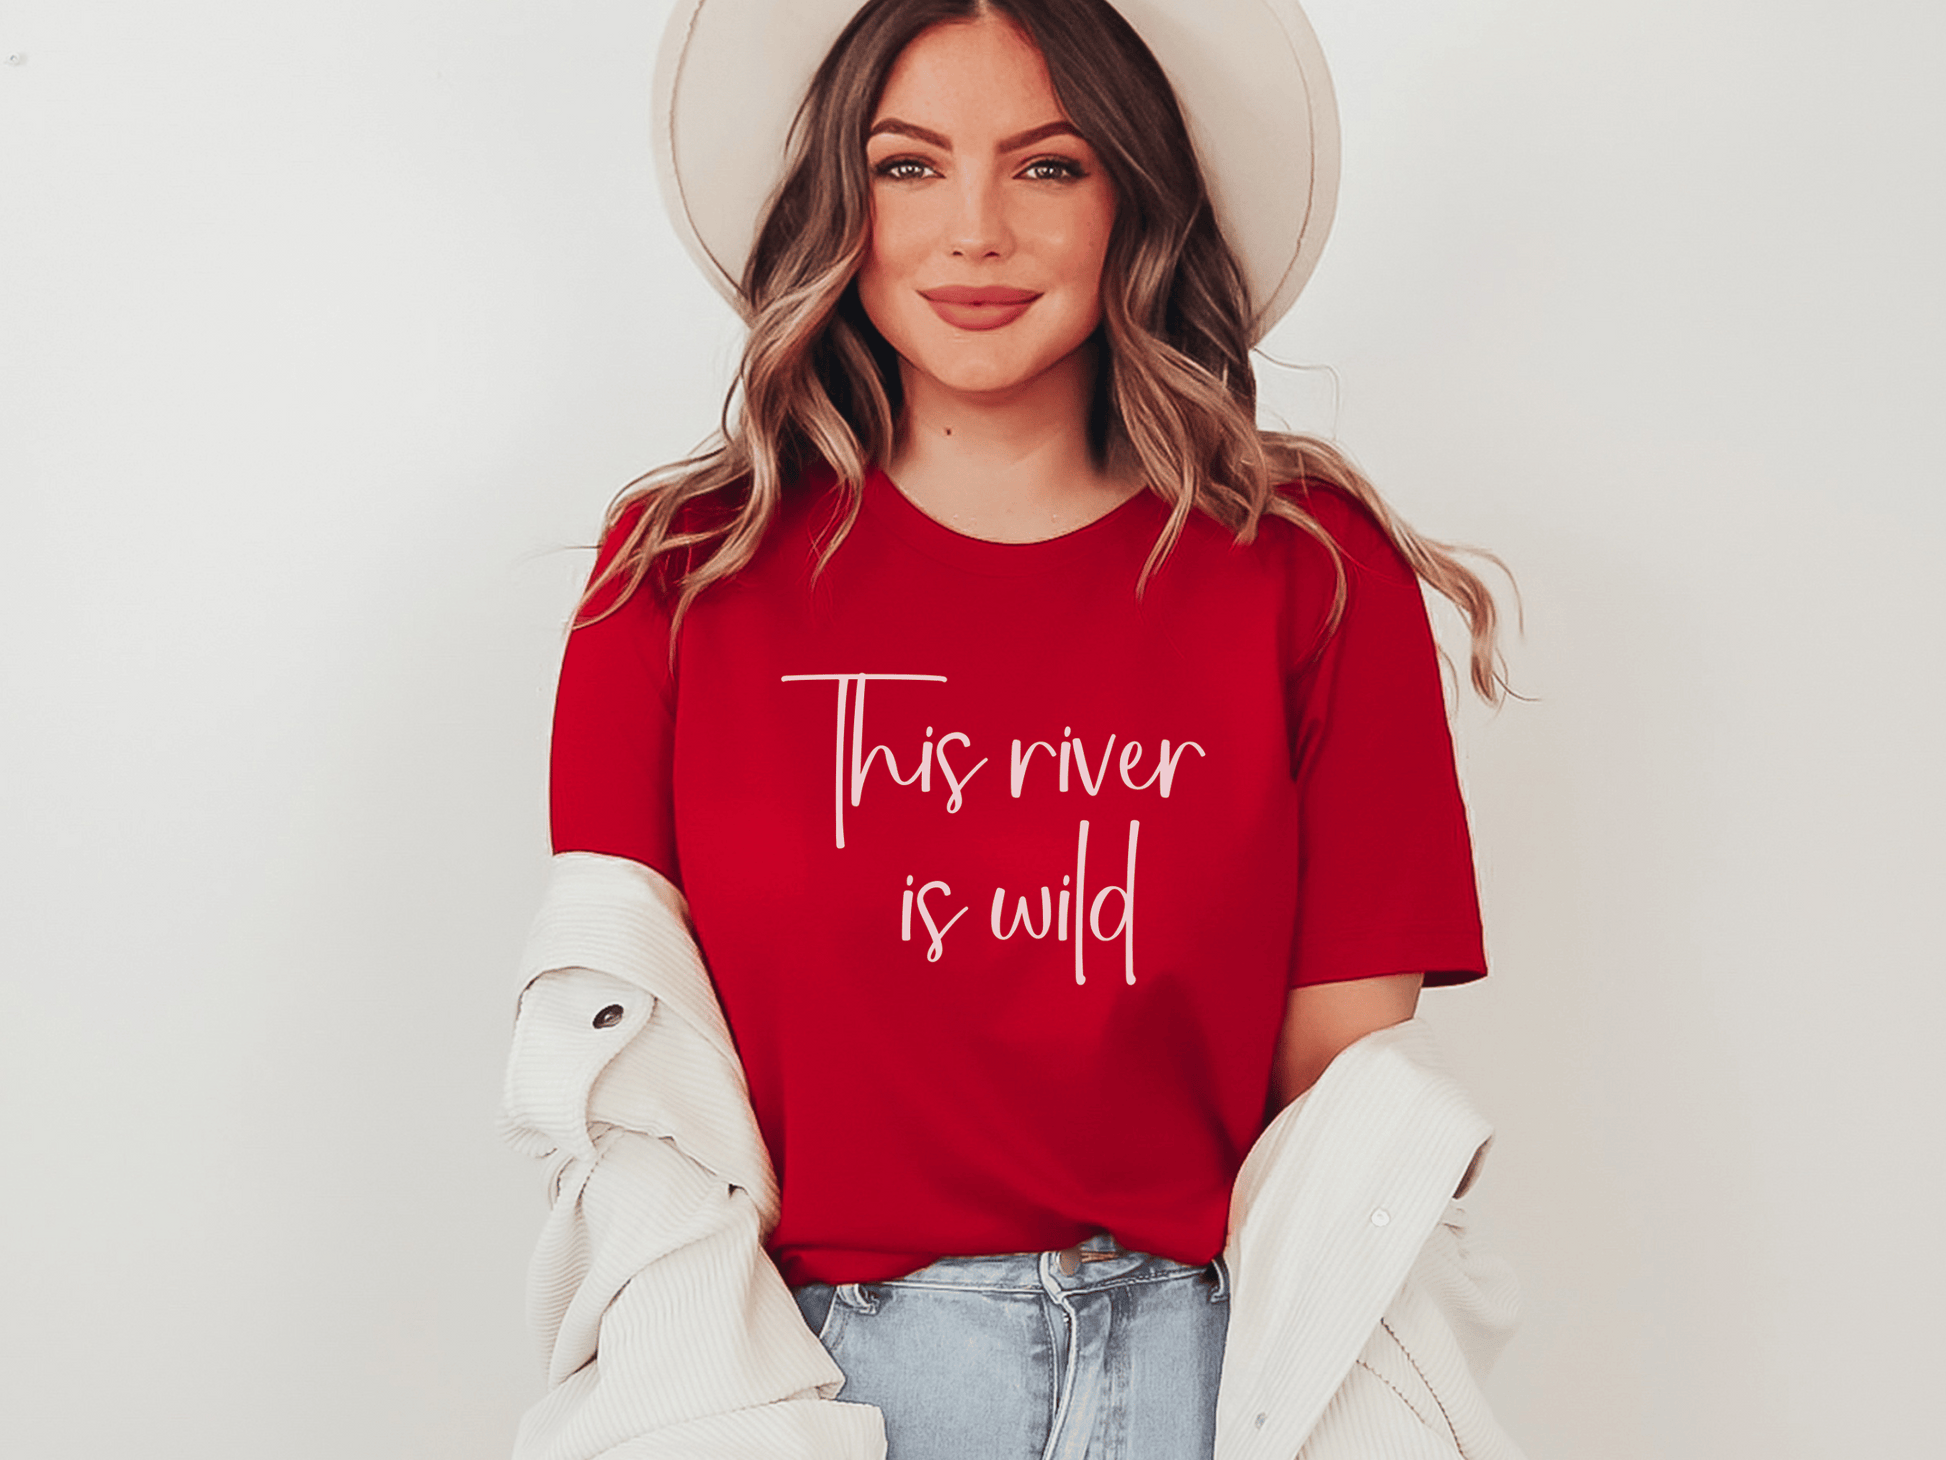 The KIllers "This River is Wild" T-Shirt in Red